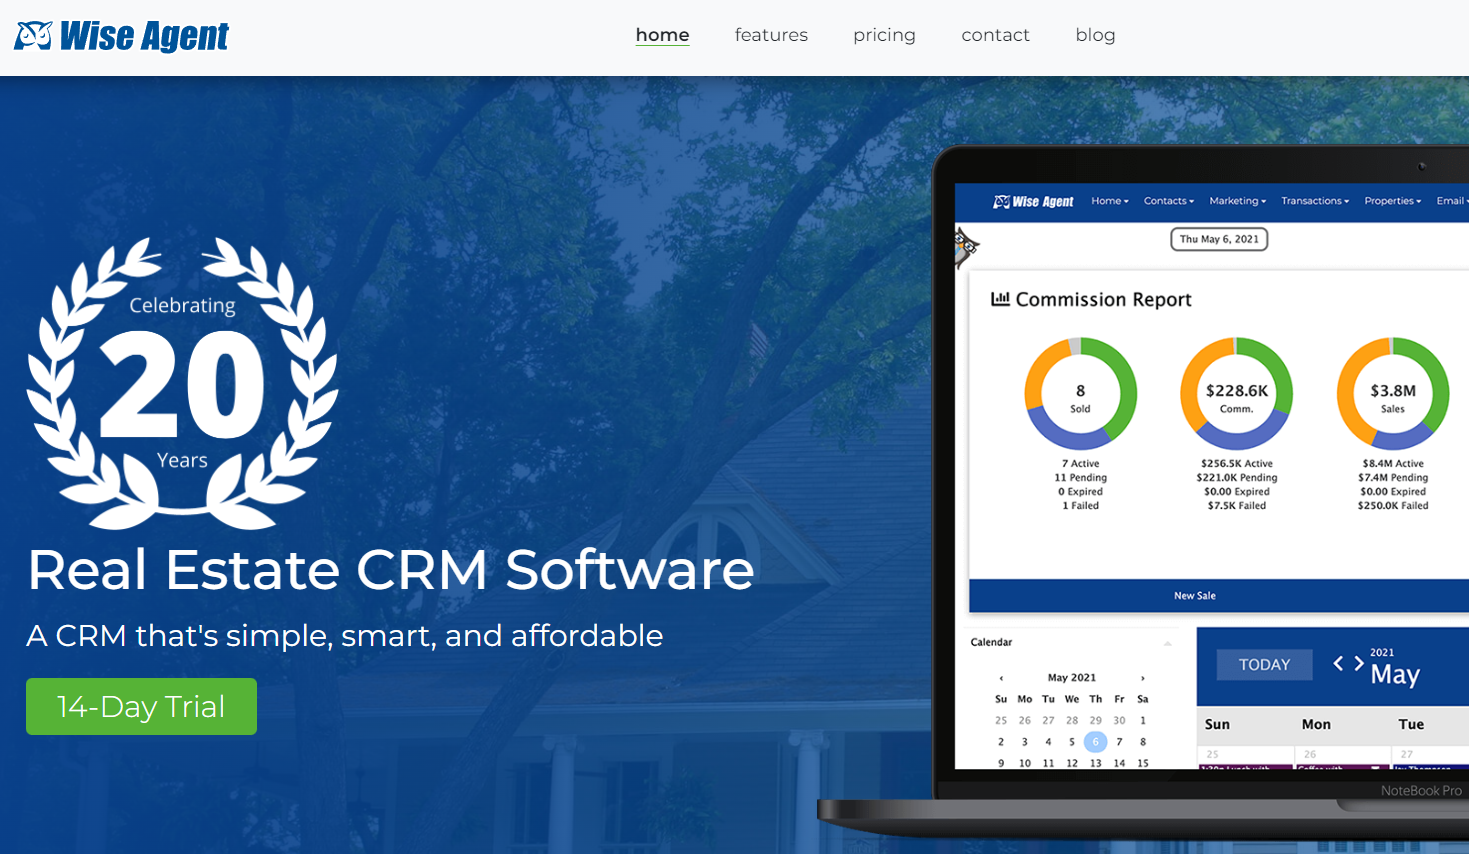 Wise Agent is another top real estate CRM.